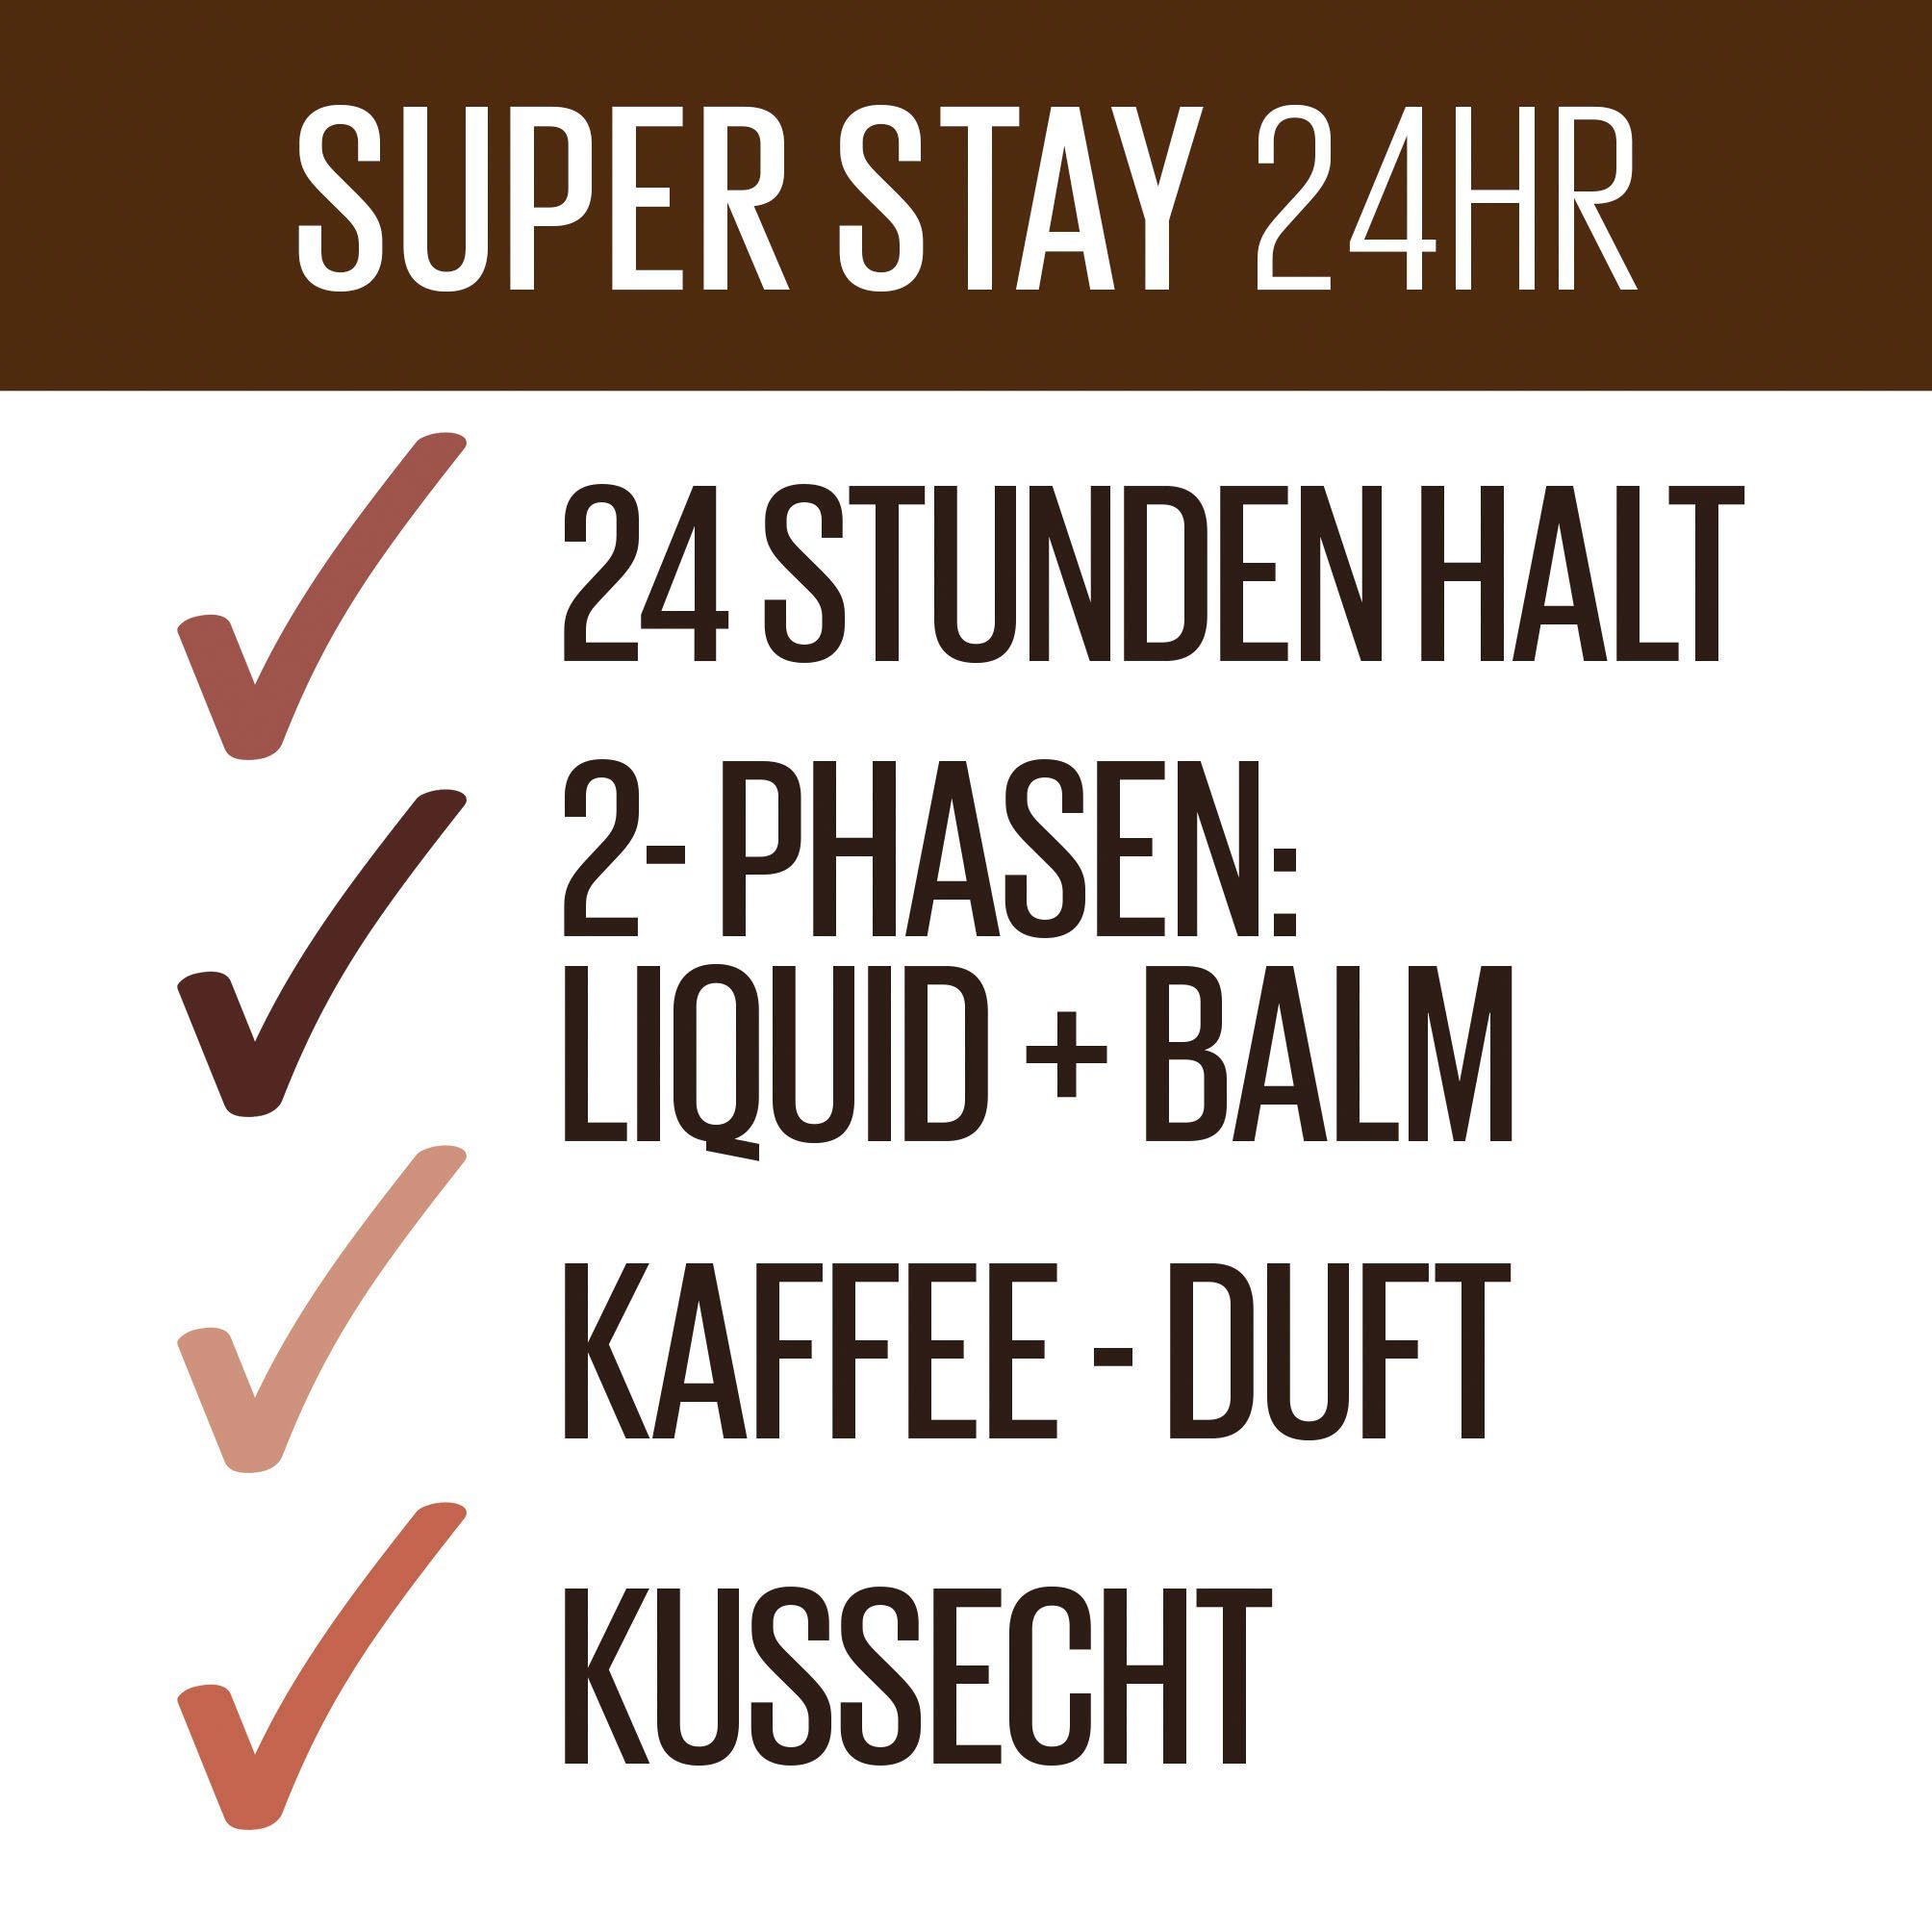 Stay 885 24H Coffee NEW More MAYBELLINE Chai Nr. Super Once YORK Lippenstift